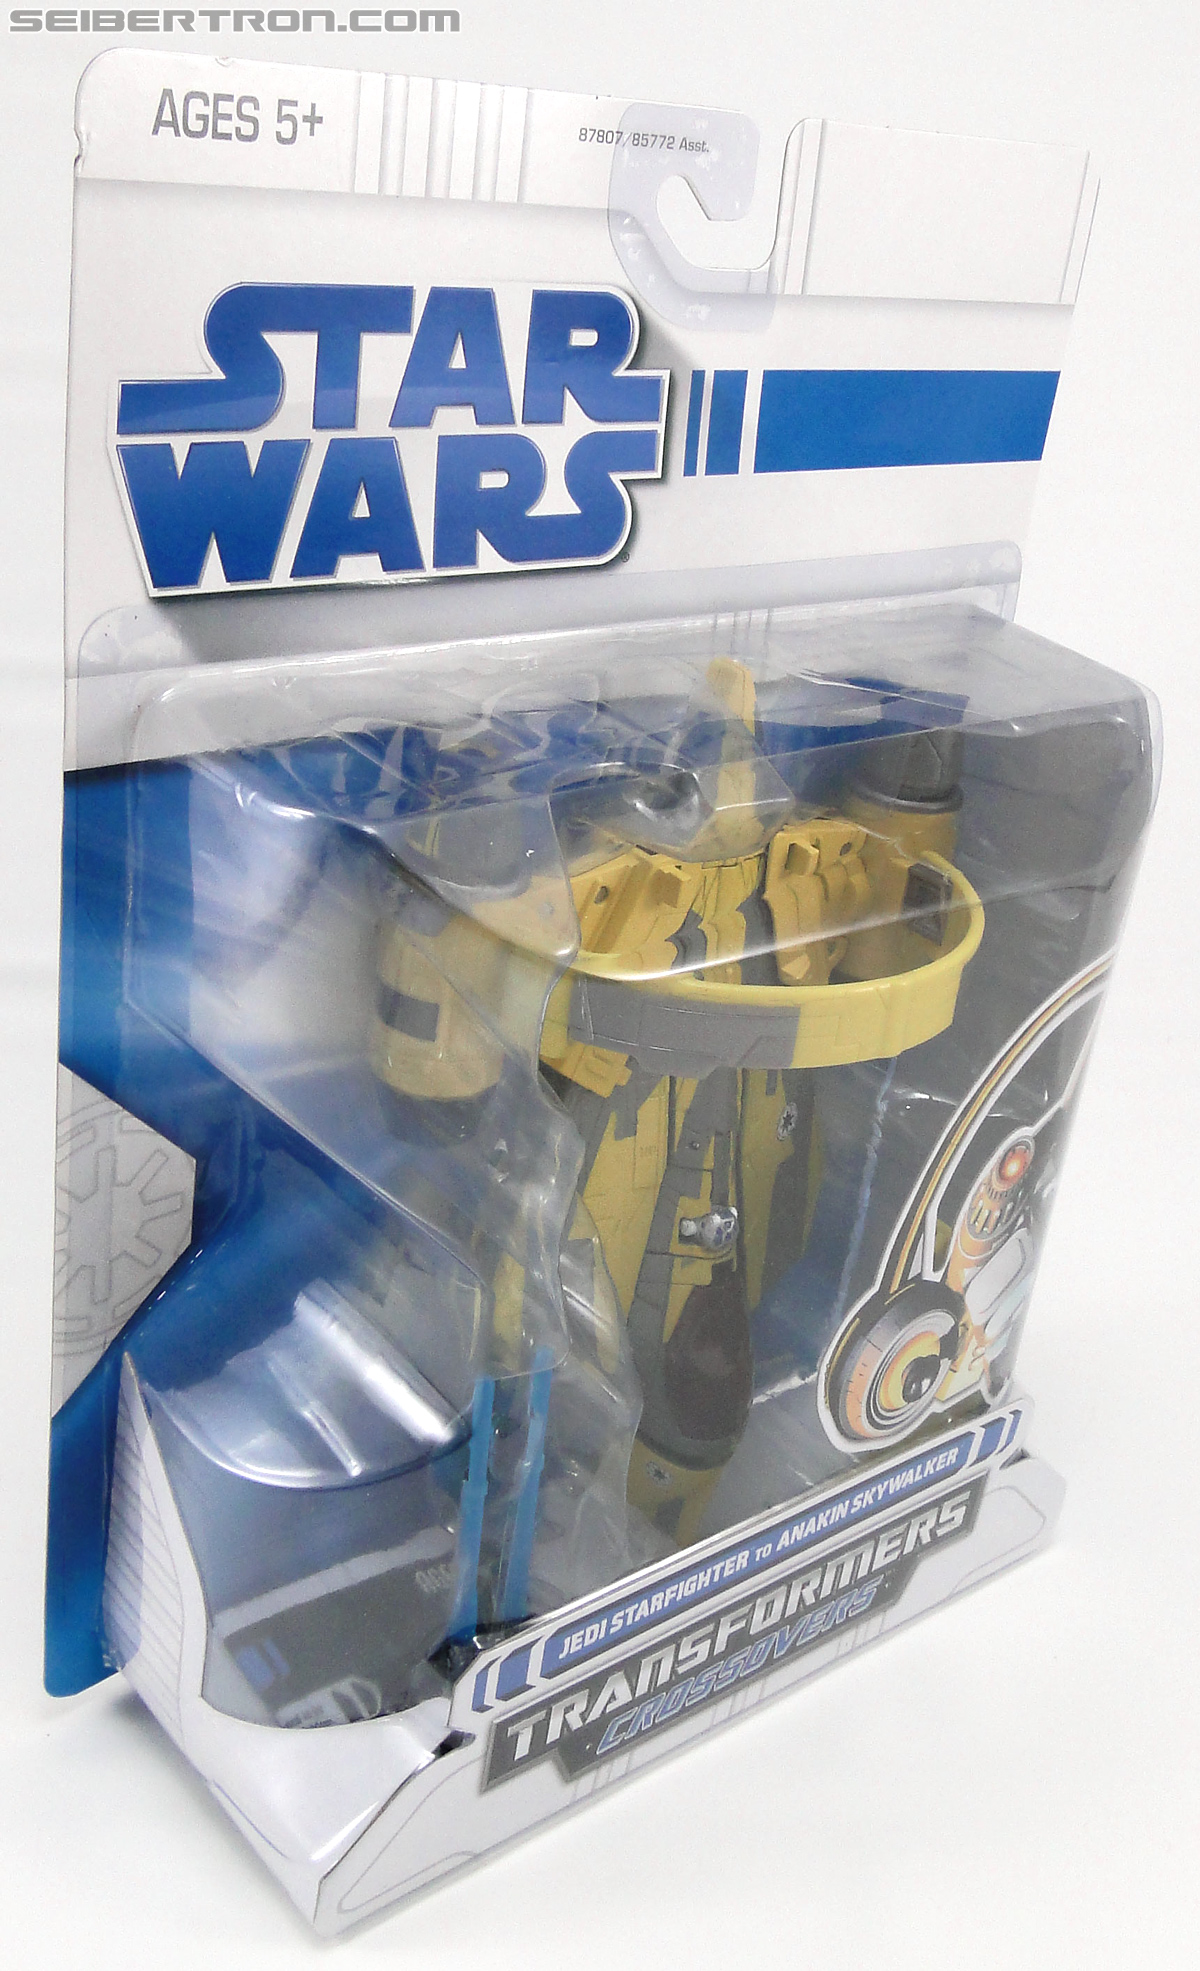 Star Wars Transformers Anakin Skywalker (Jedi Starfighter with Hyperspace Docking Ring) (Image #5 of 131)